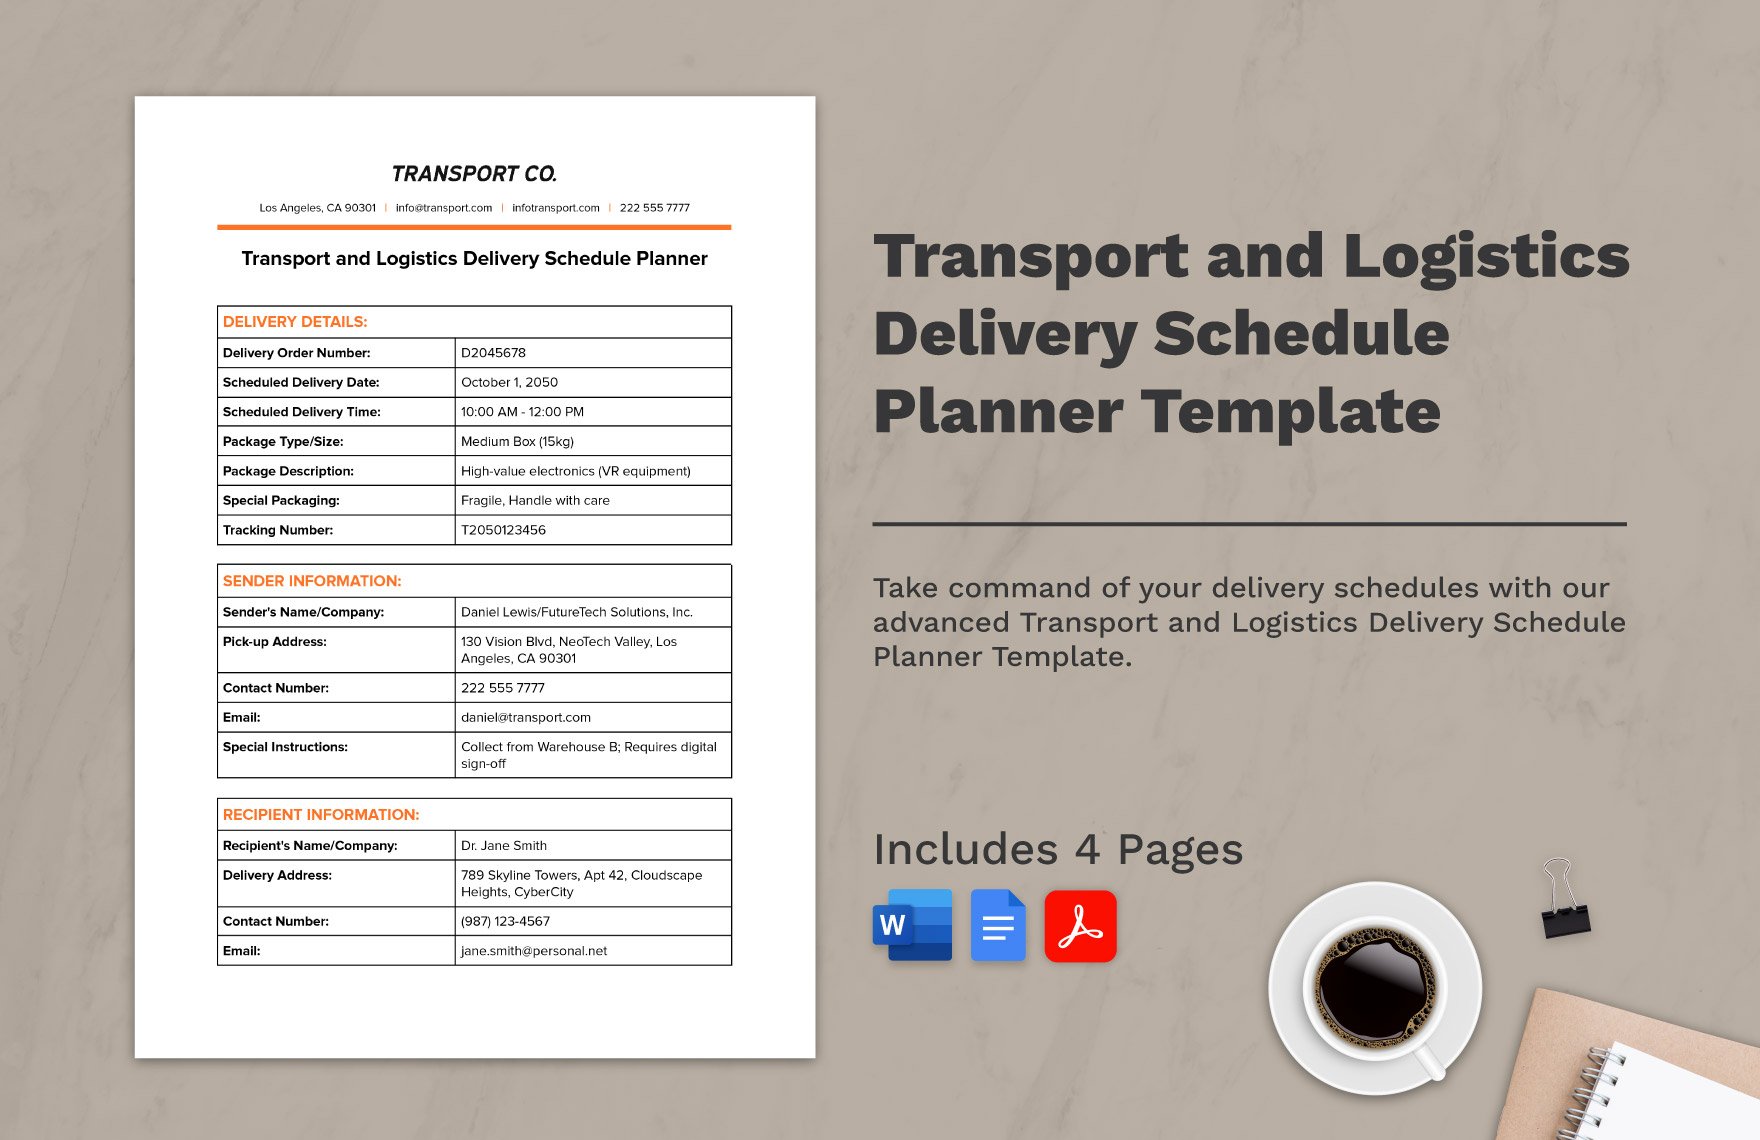 Transport and Logistics Delivery Schedule Planner Template